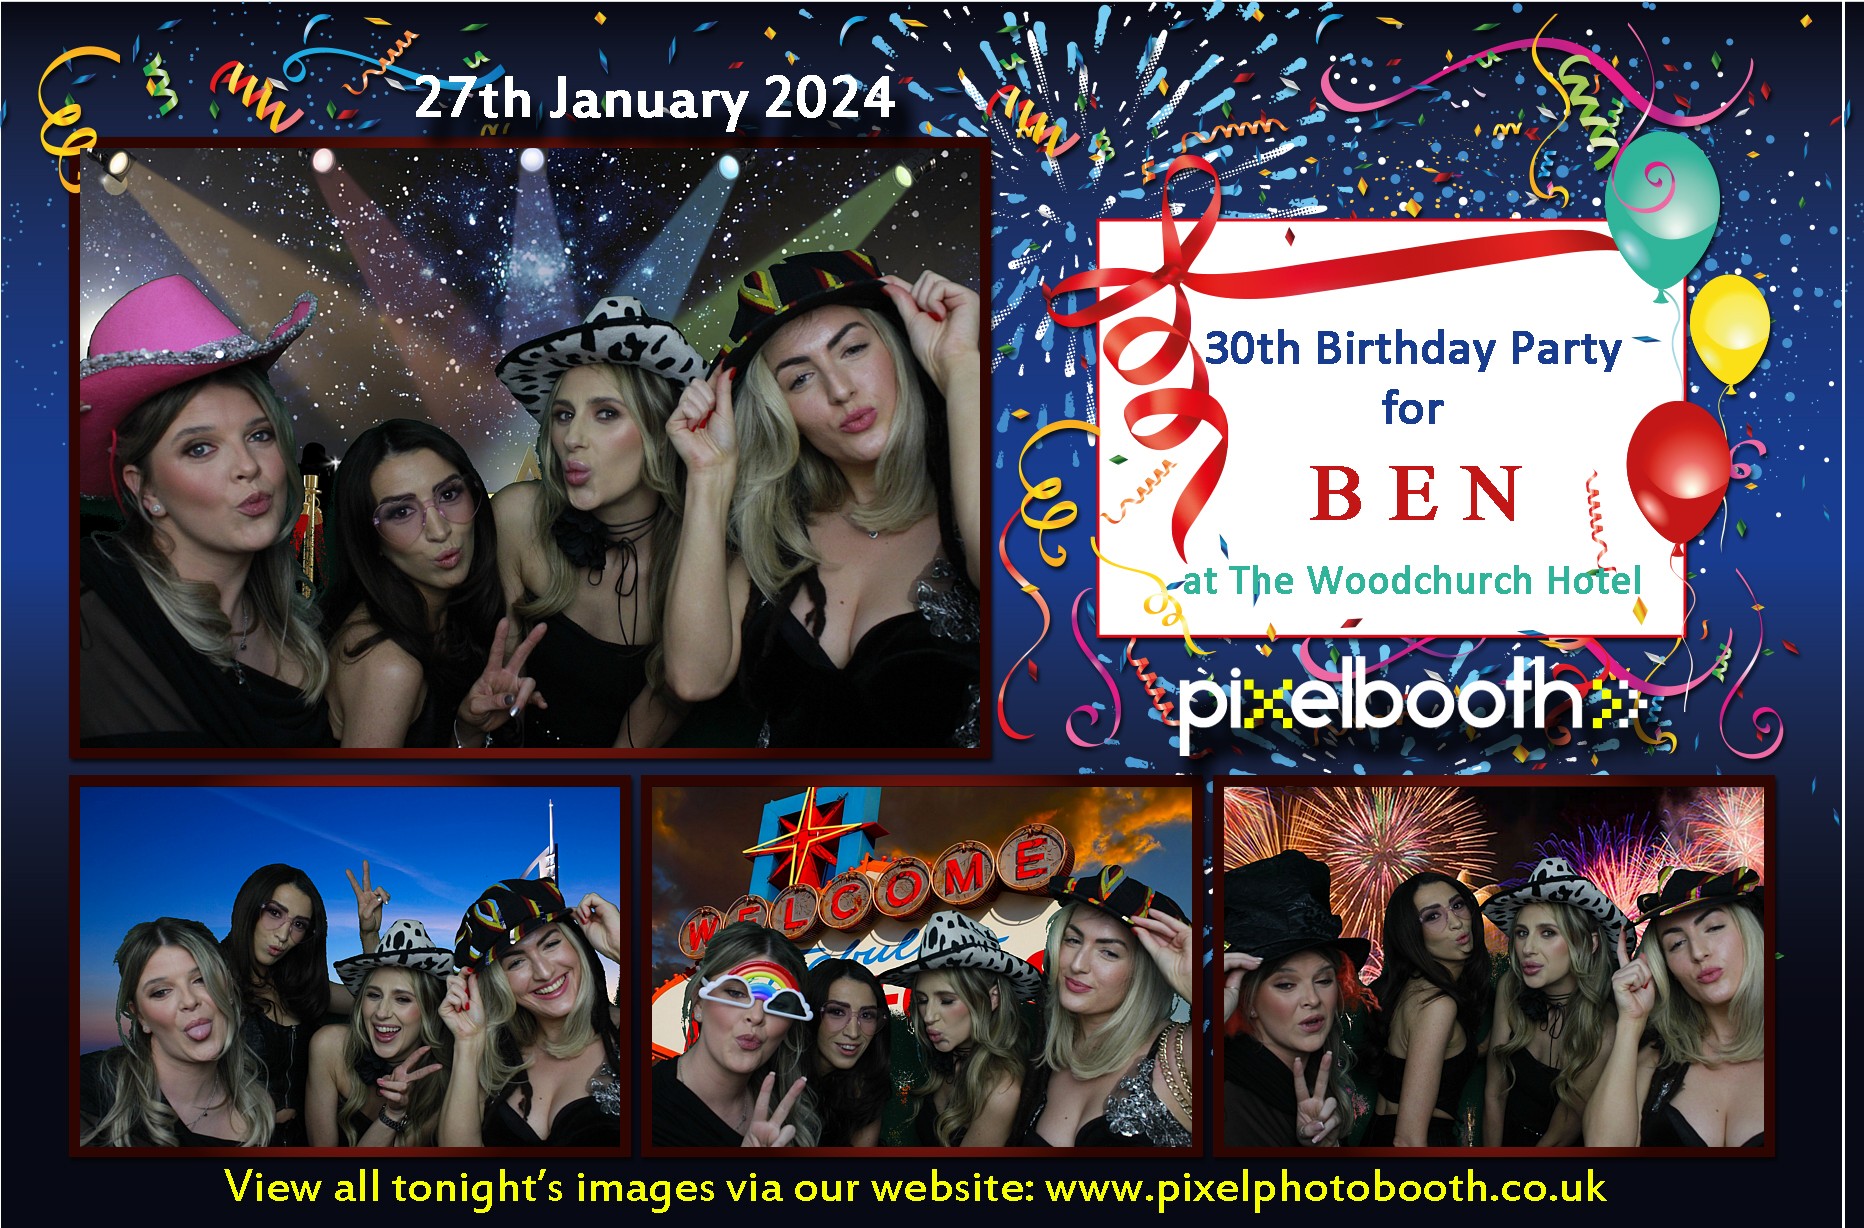 27th Jan 2024: 30th for Ben at The Woodchurch Hotel